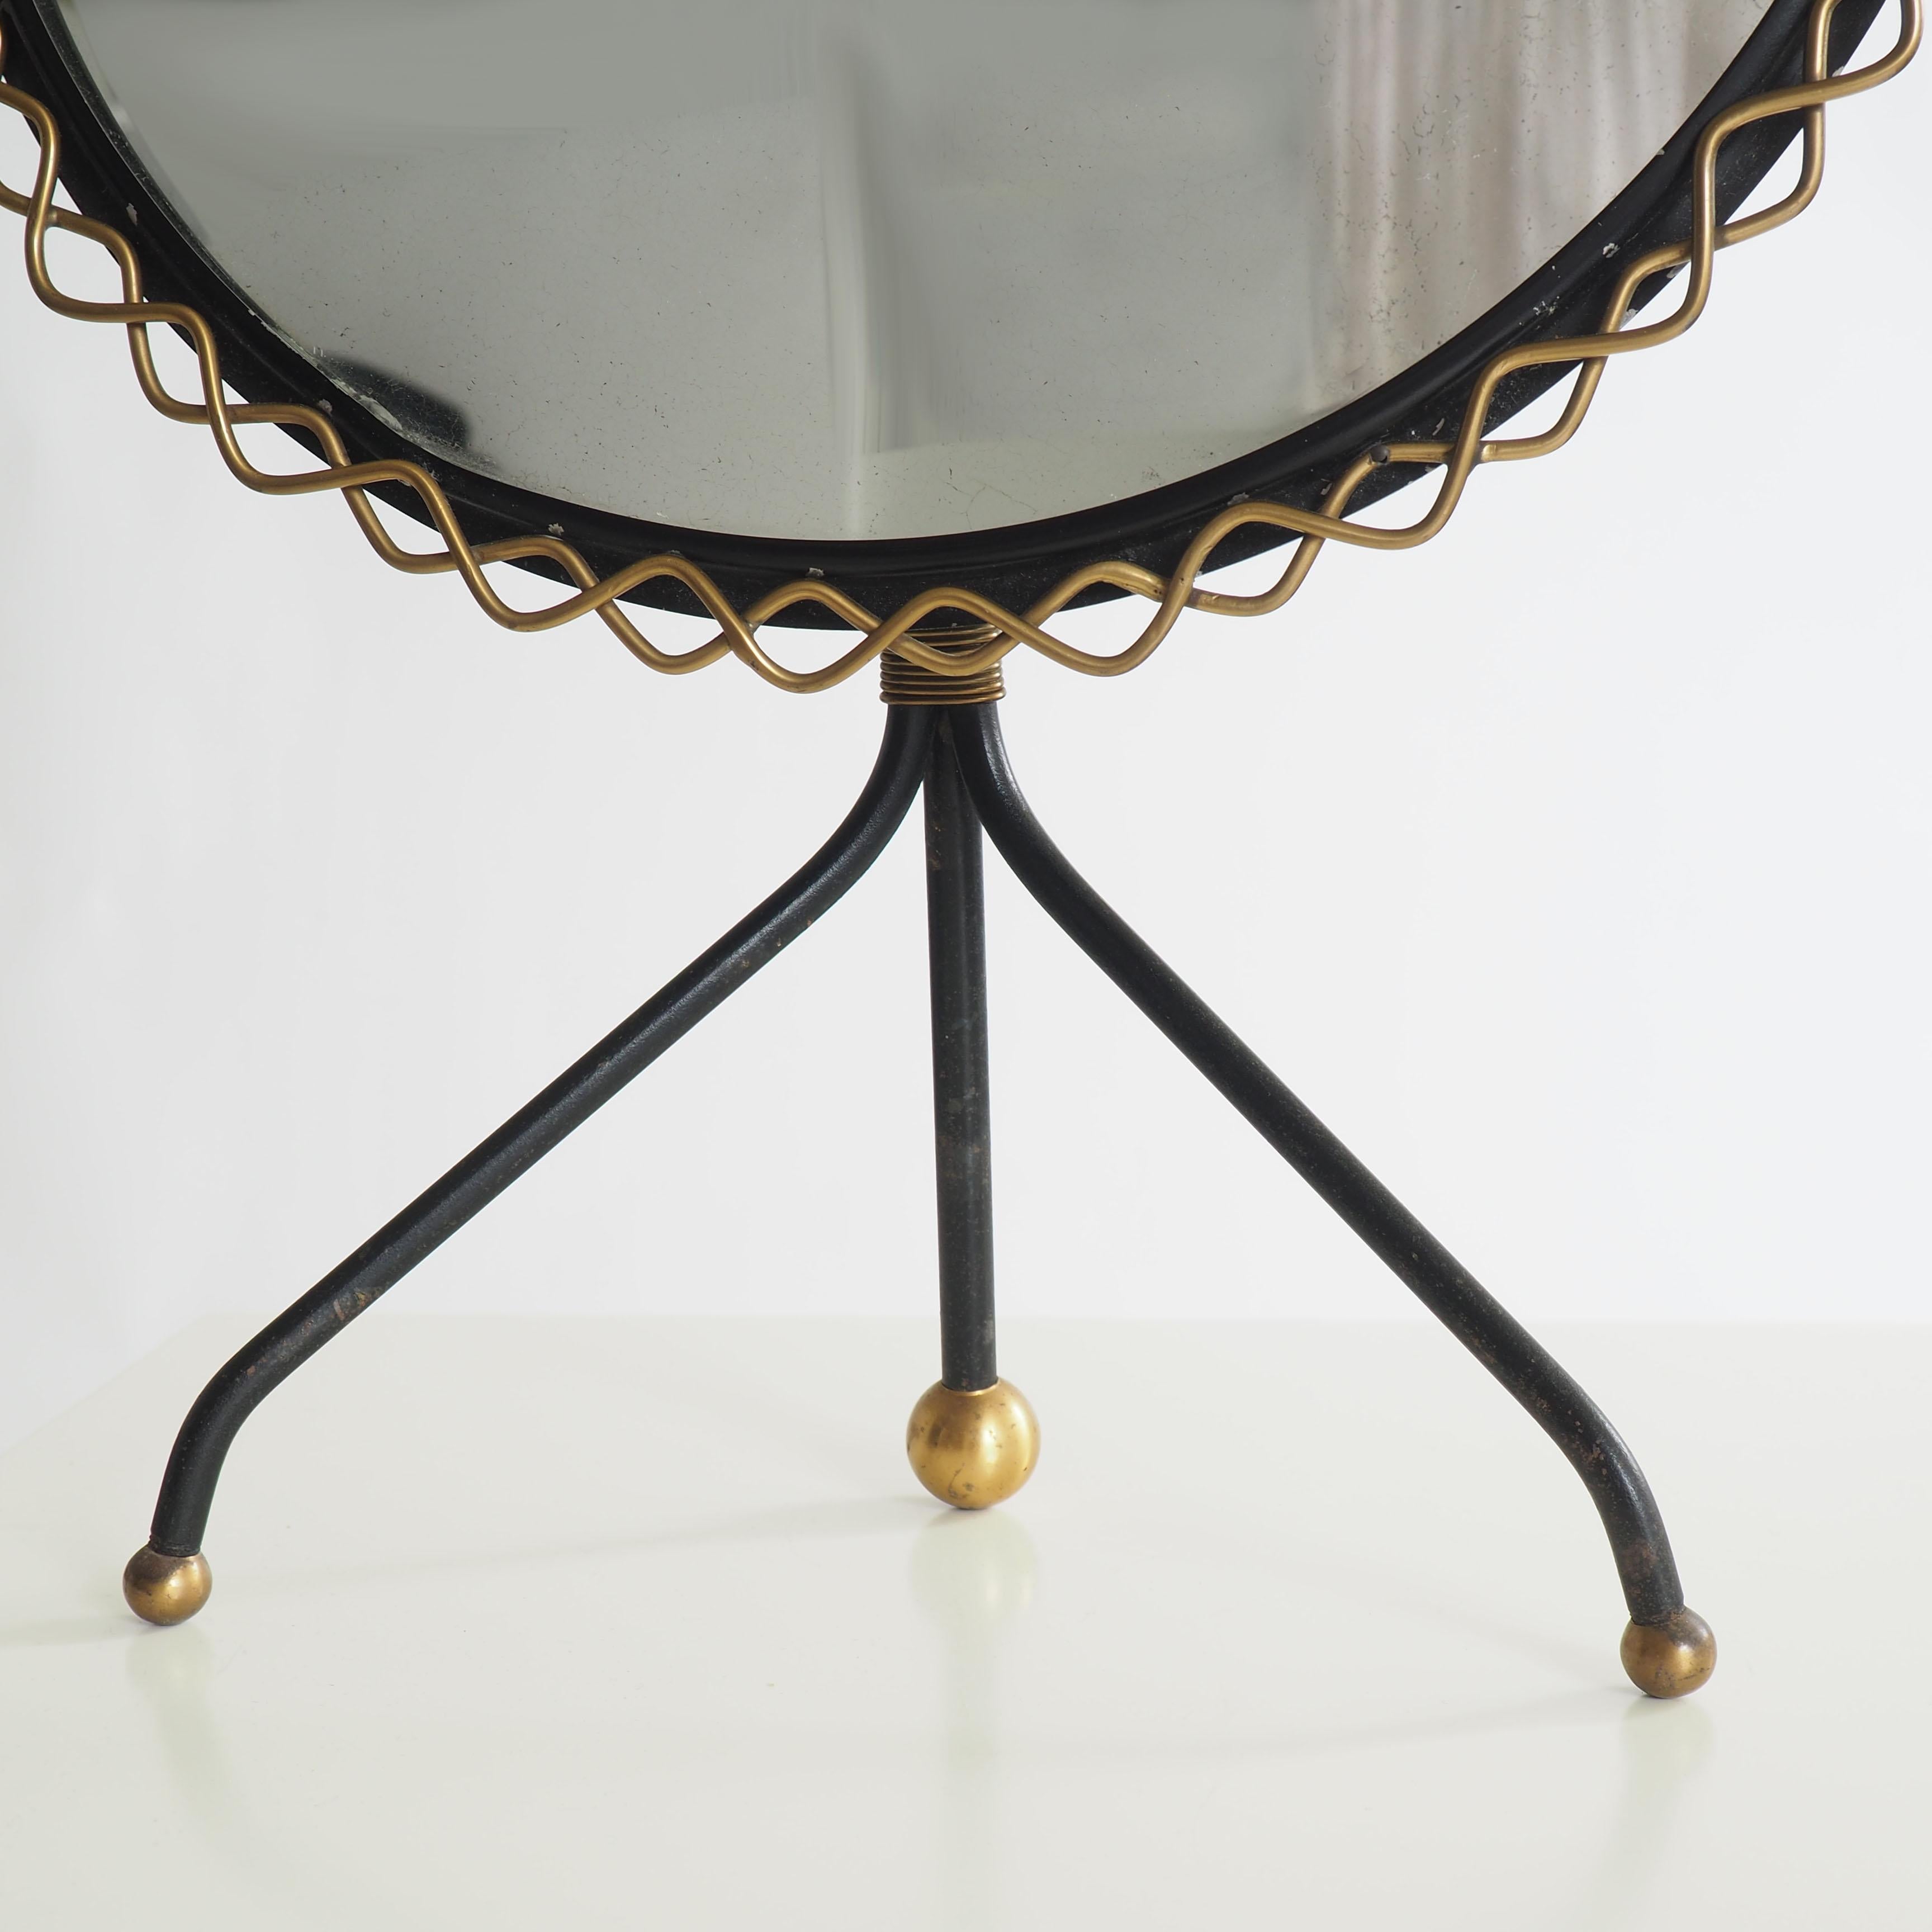 Very rare table mirror in brass and metal by Hans-Agne Jakobsson. Made in his own workshop in the 1950s.